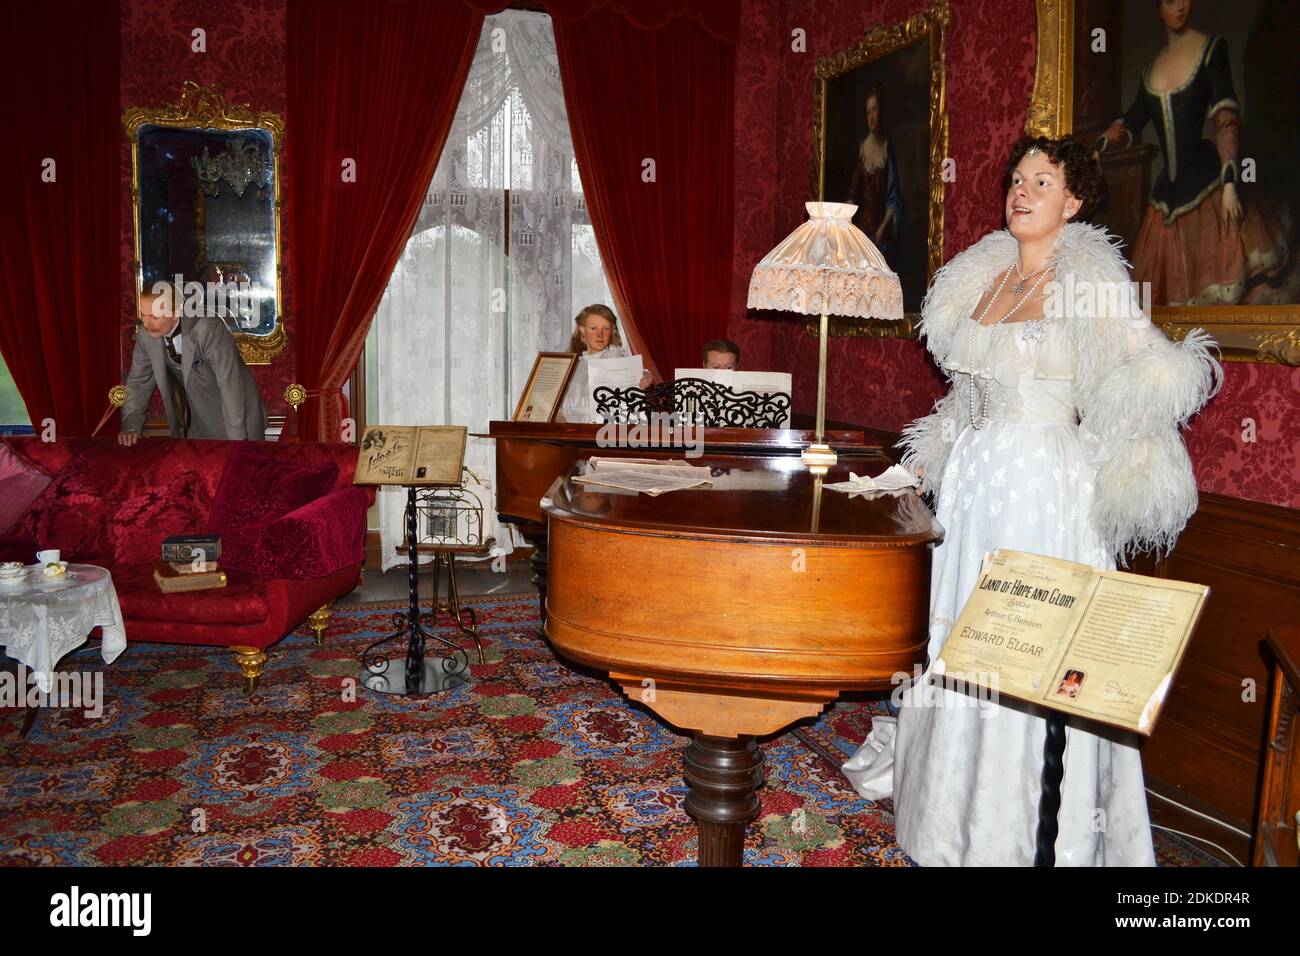 Warwick Castle, Warwickshire, UK. Inside the state rooms. Daisy and family in the music room. Stock Photo